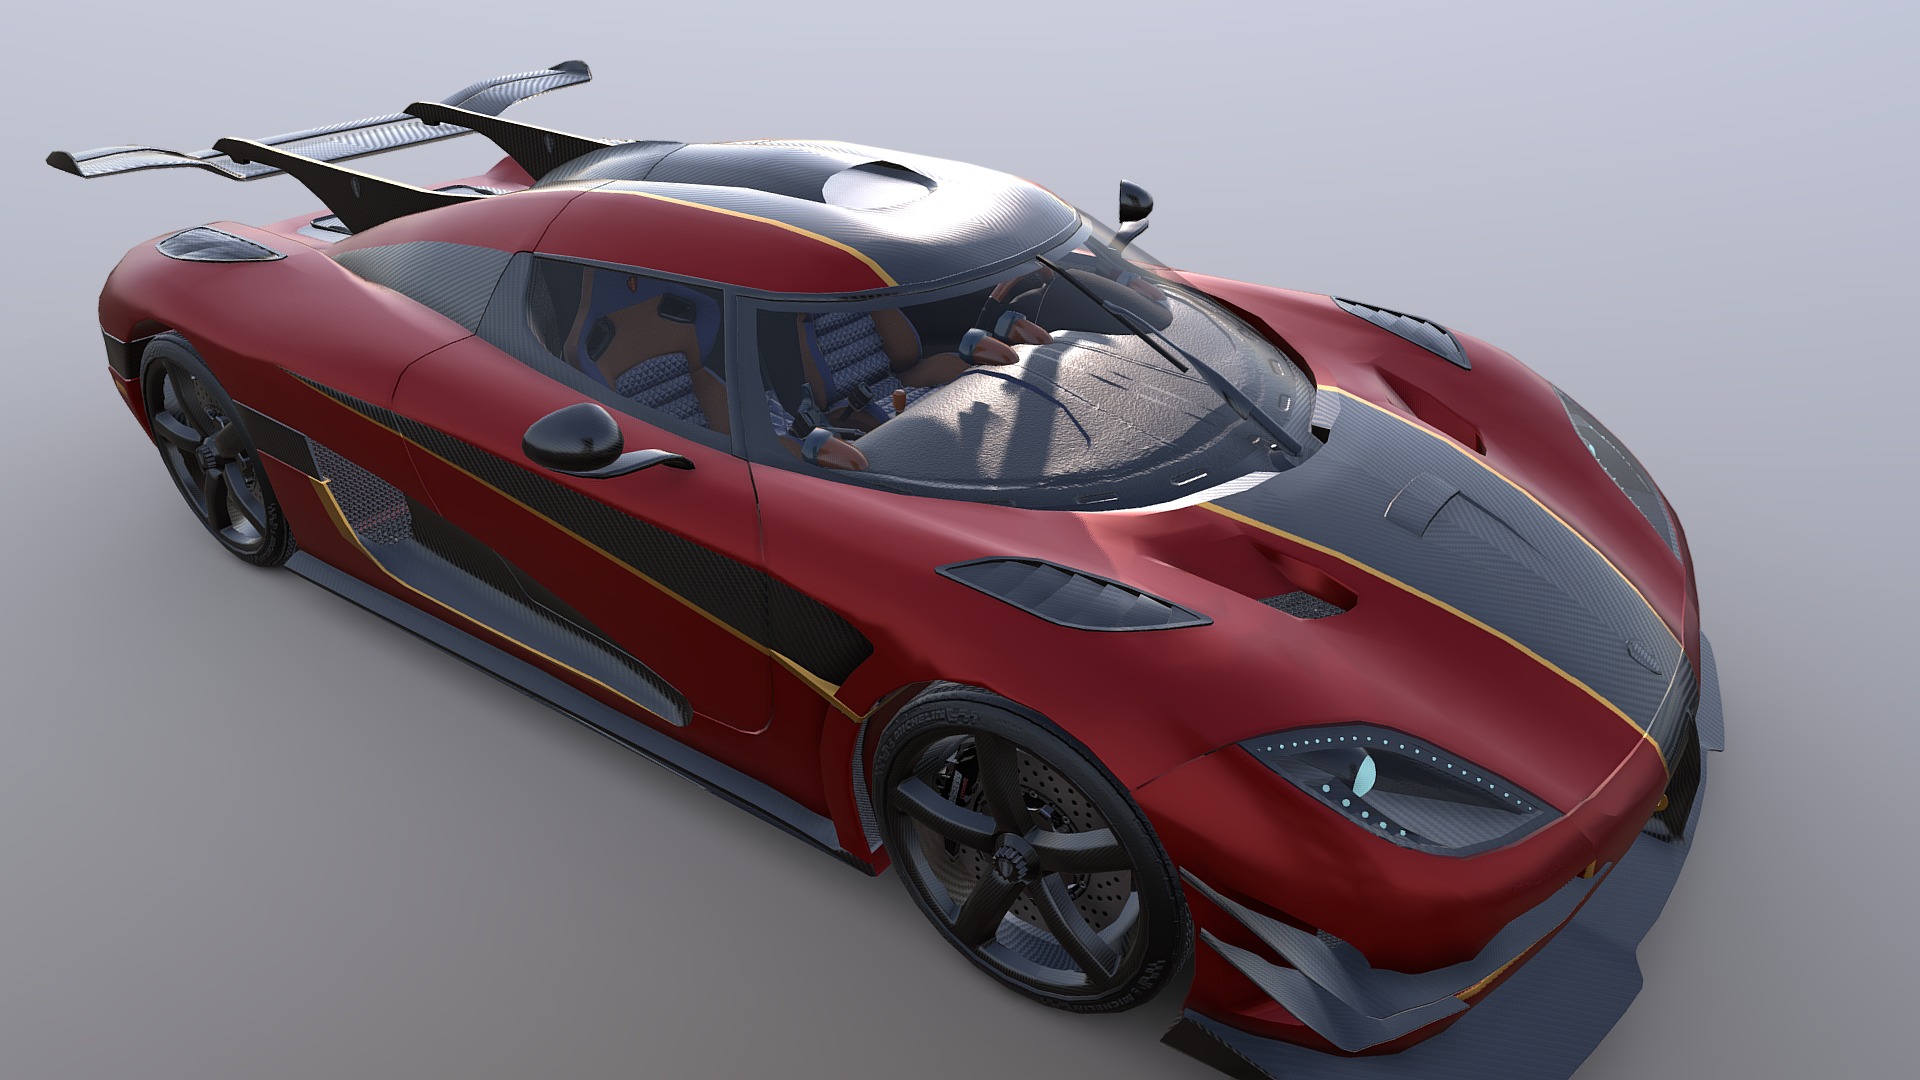 Koenisegg One1 low poly,
made in maya and substance painter - Koenigsegg One1 low poly - Download Free 3D model by jkazulyblanco 3d model